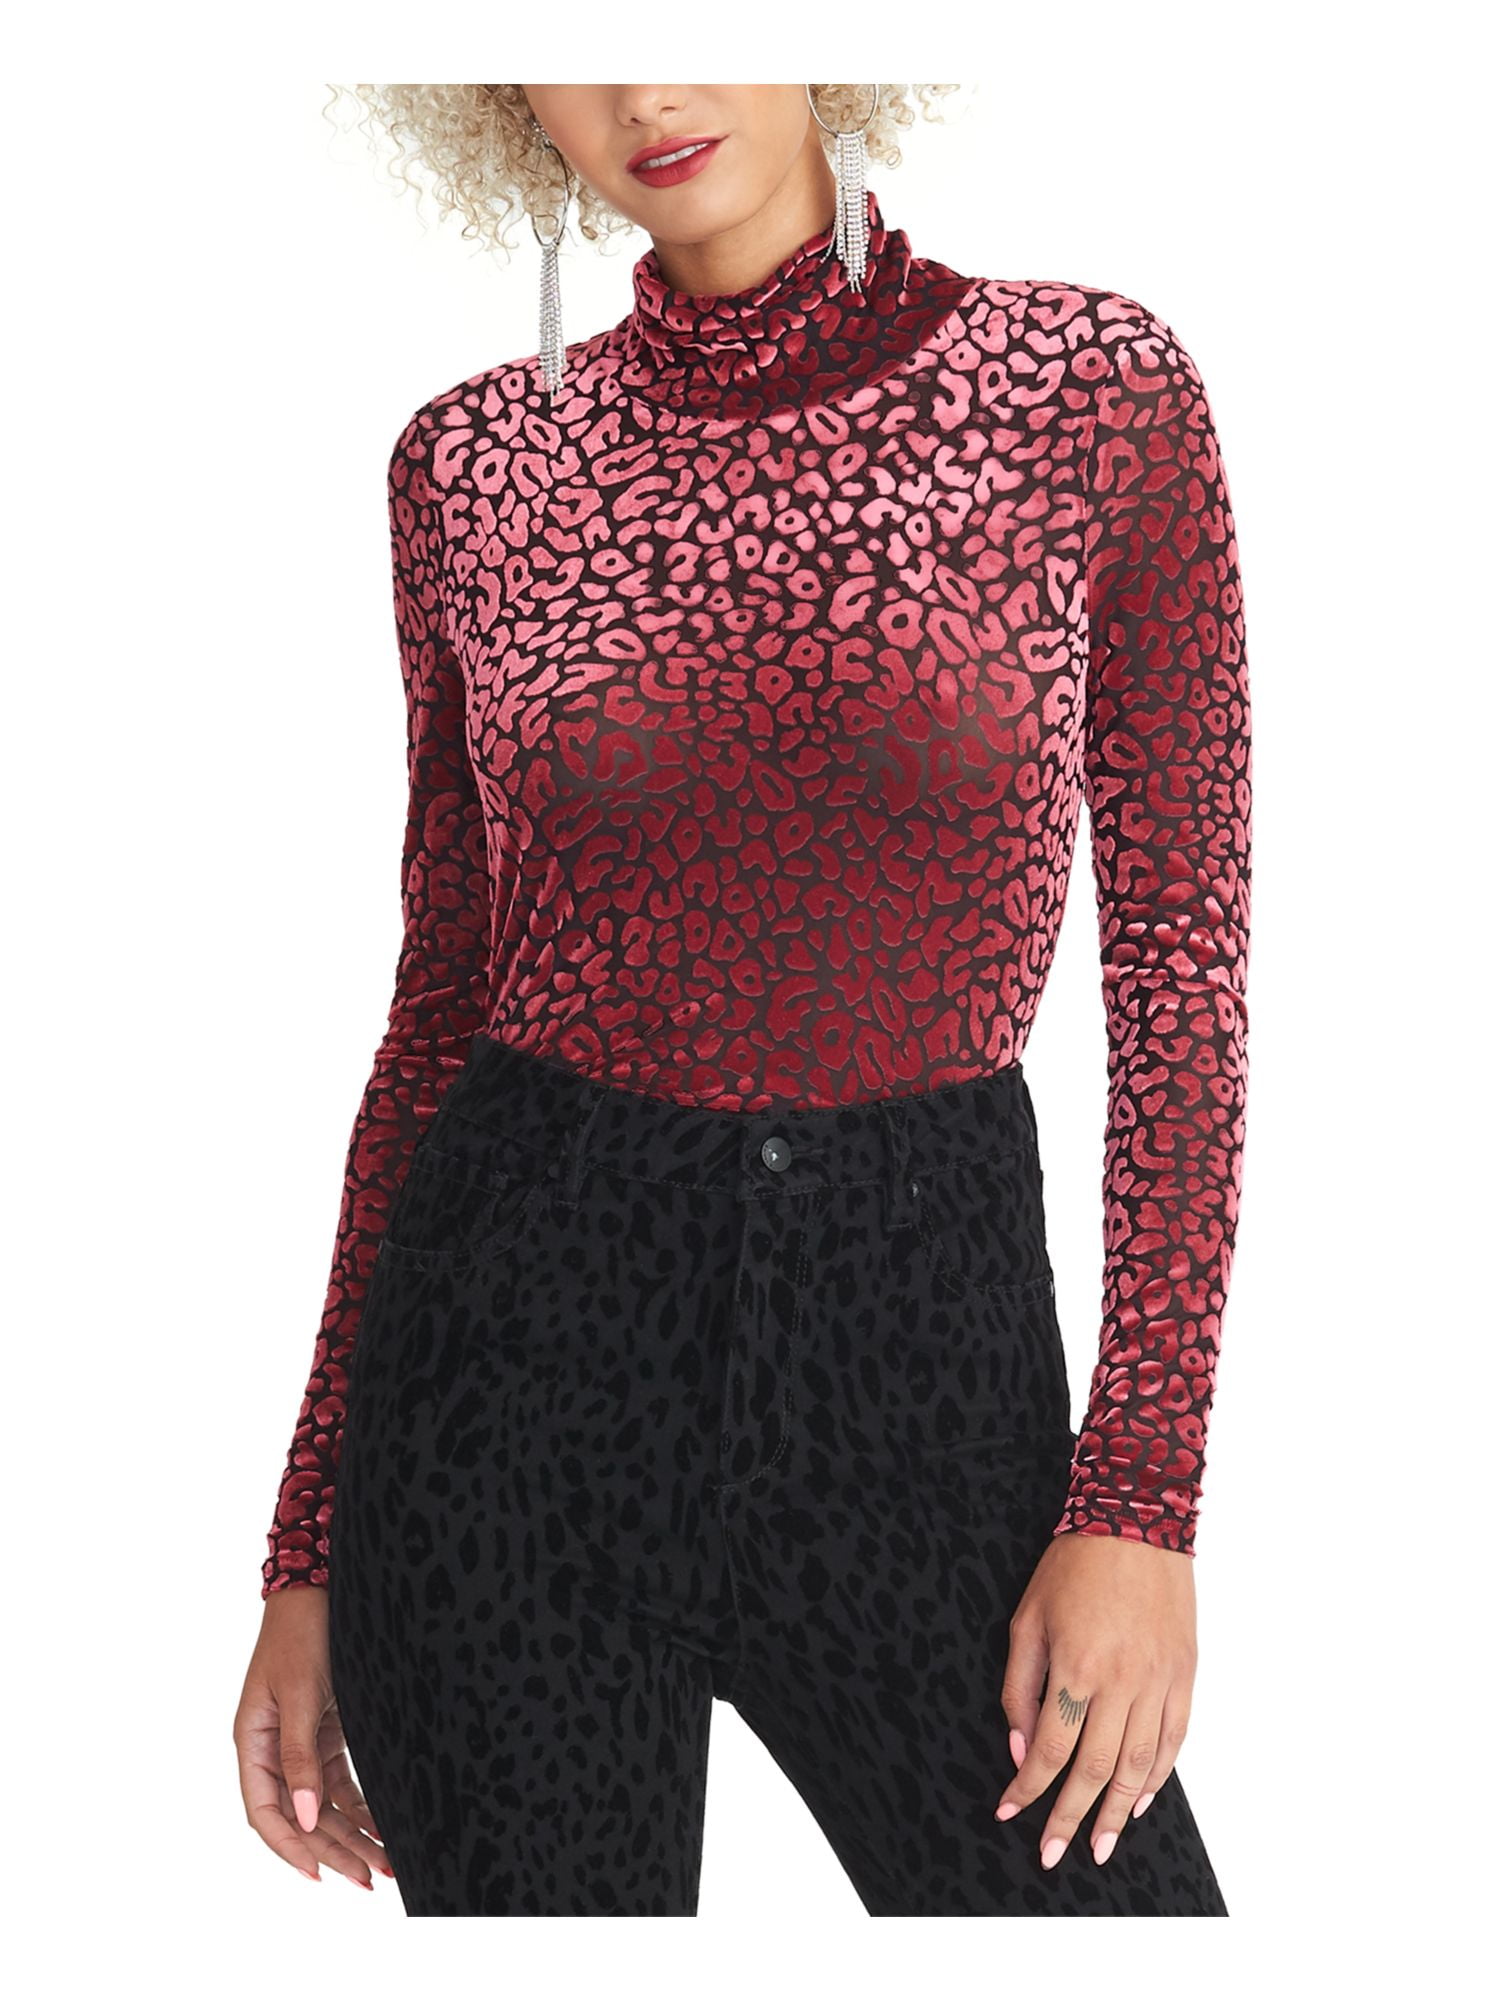 Great quality Exquisite goods online purchase Rachel Roy Womens Animal